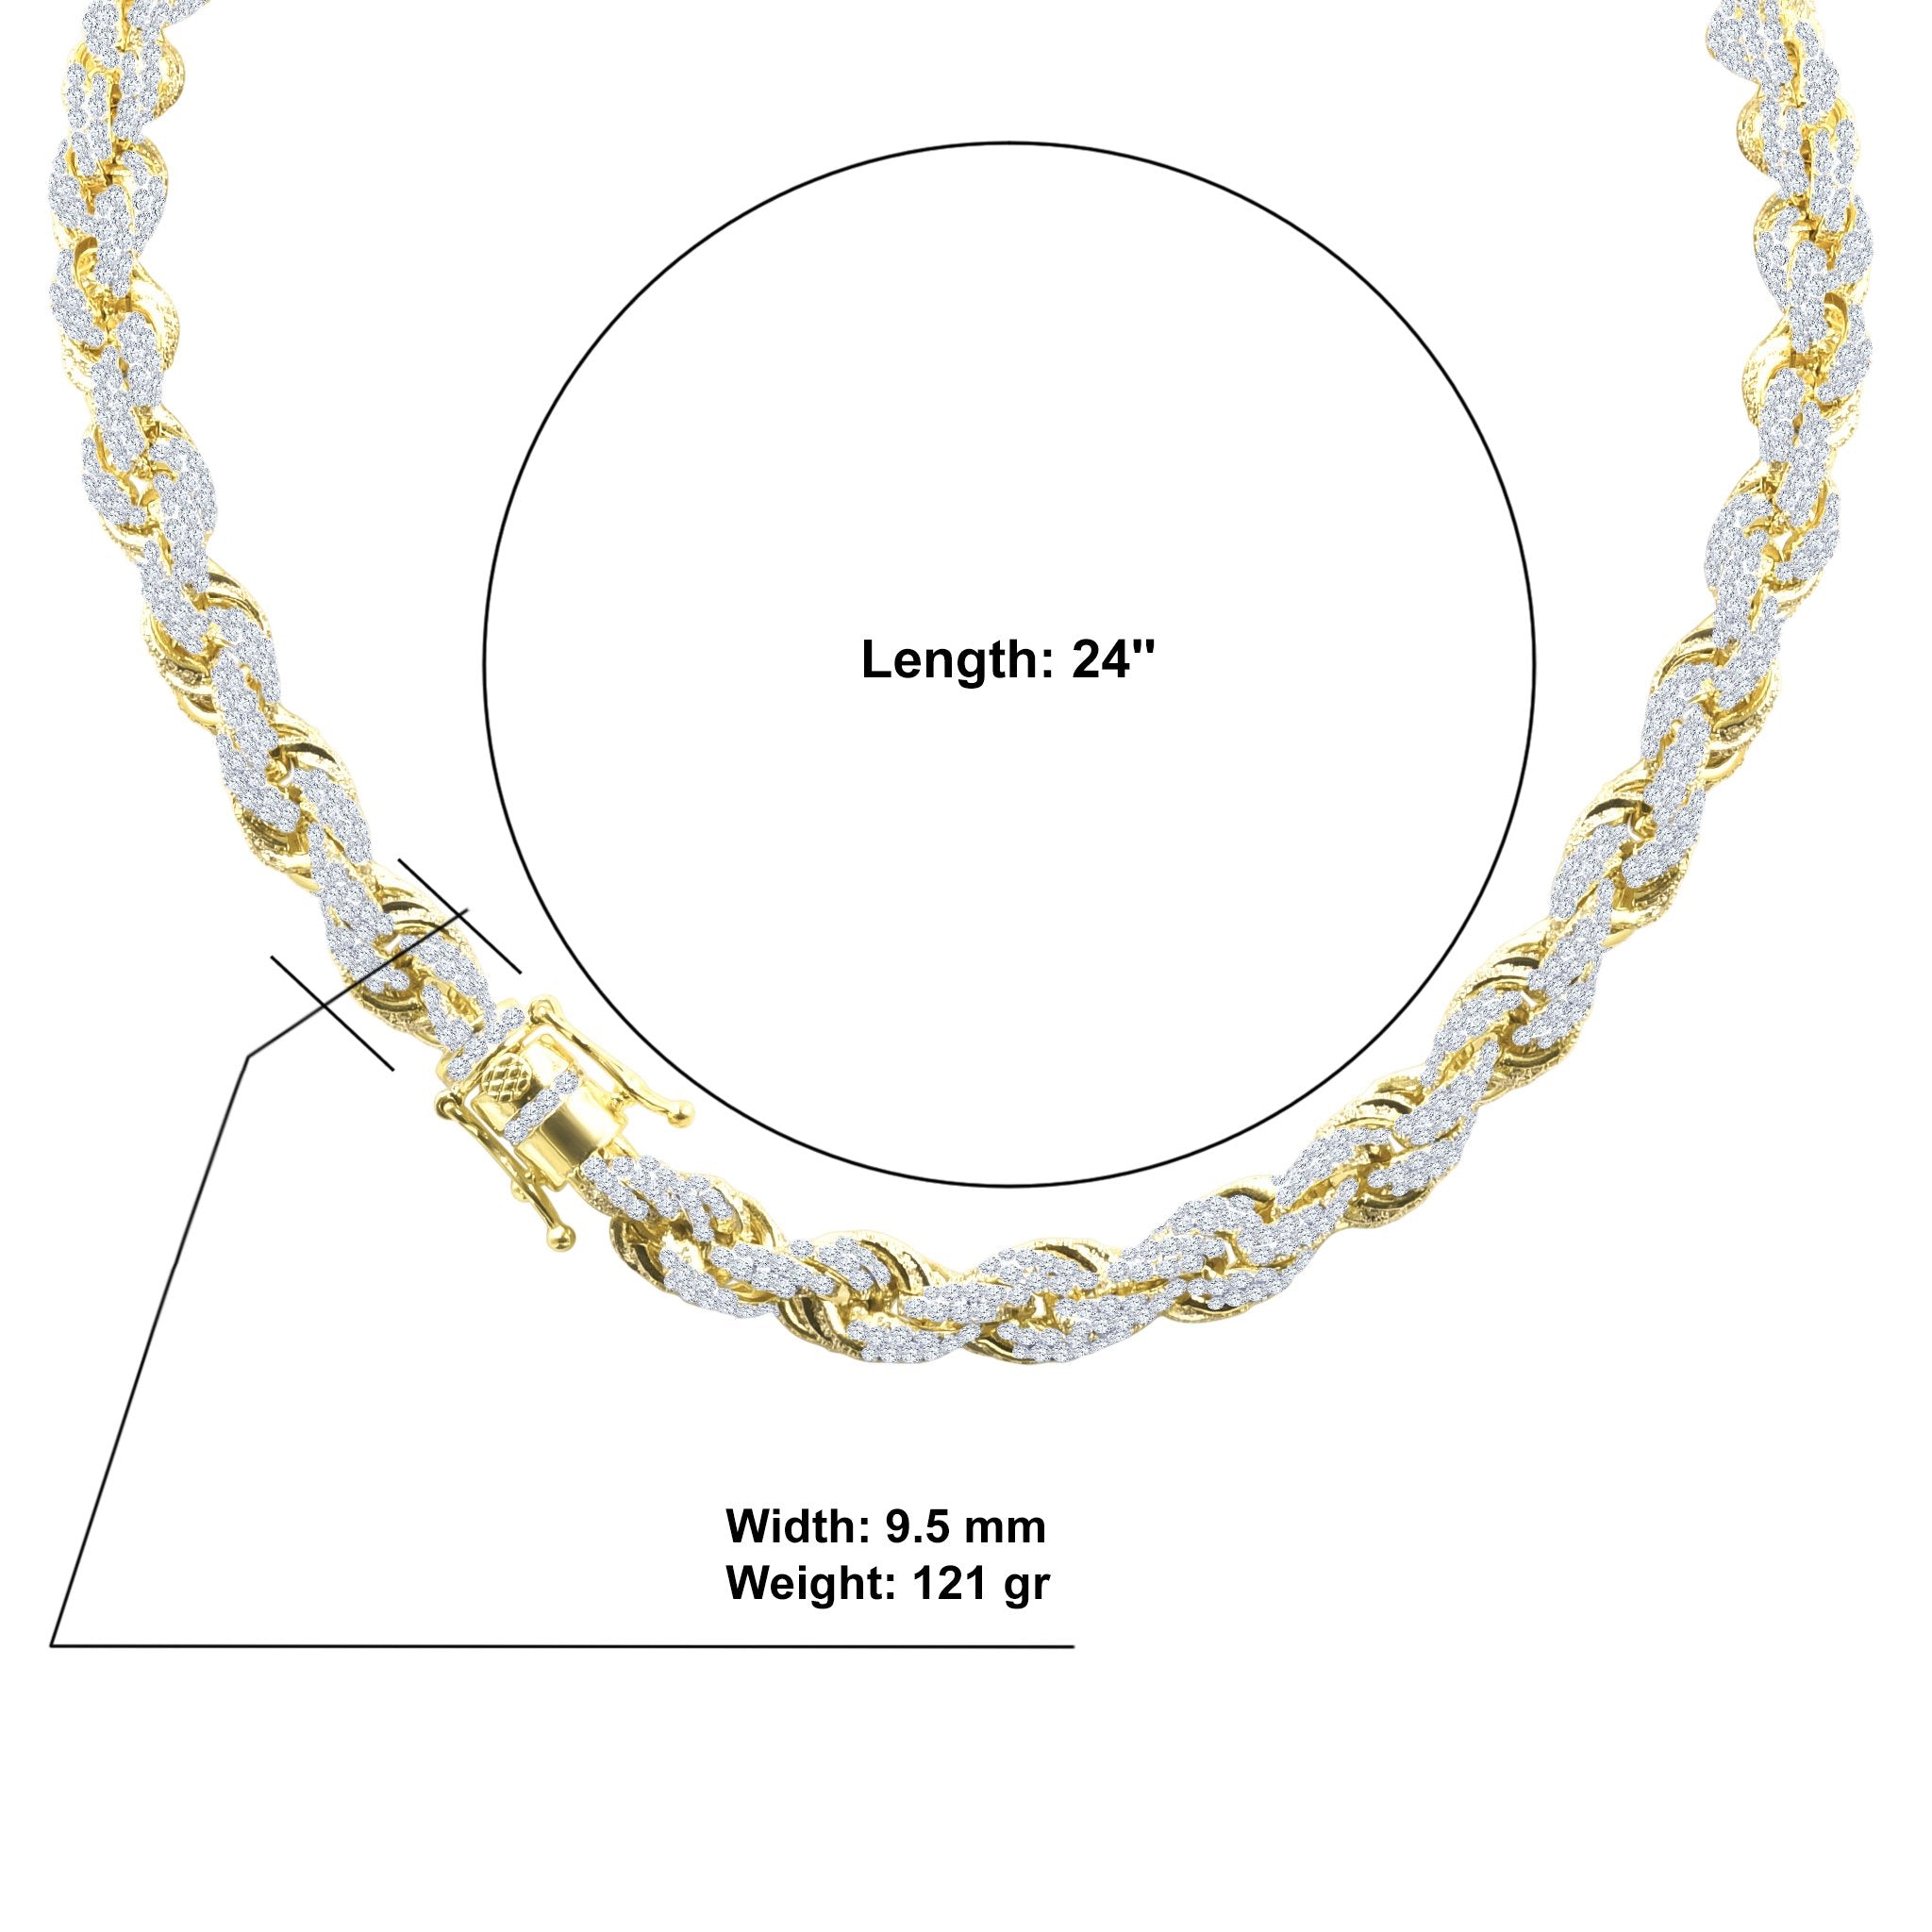 Vintage-Modern Montage CZ Chain Necklace | Hand-Set AAA CZs, 20" Length, 121g Weight
Keywords: CZ Chain Necklace, Vintage-Modern, Hand-Set AAA CZs, 20" Length, 121g Weight, - Jewelry & Watches - Bijou Her -  -  - 